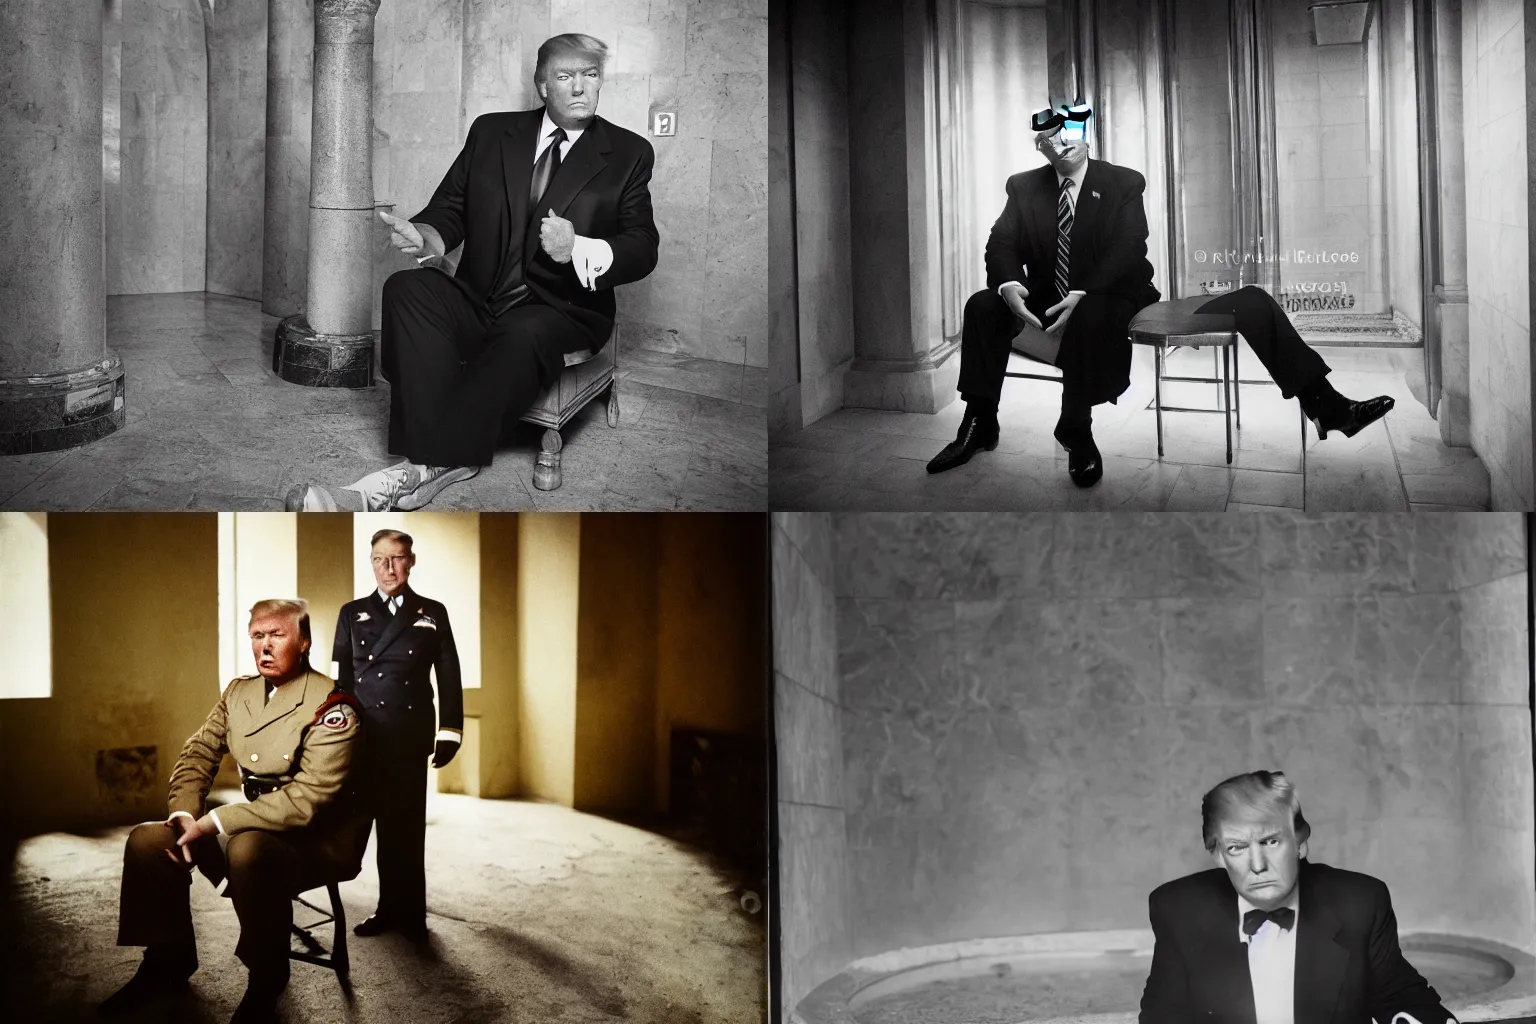 Prompt: portrait photograph of Donald Trump wearing Reichsführer outfit sitting in a roman bathhouse, off-camera flash, canon 24mm lens f8 aperture, color Ektachrome photograph, single point of light coming through window, water reflections